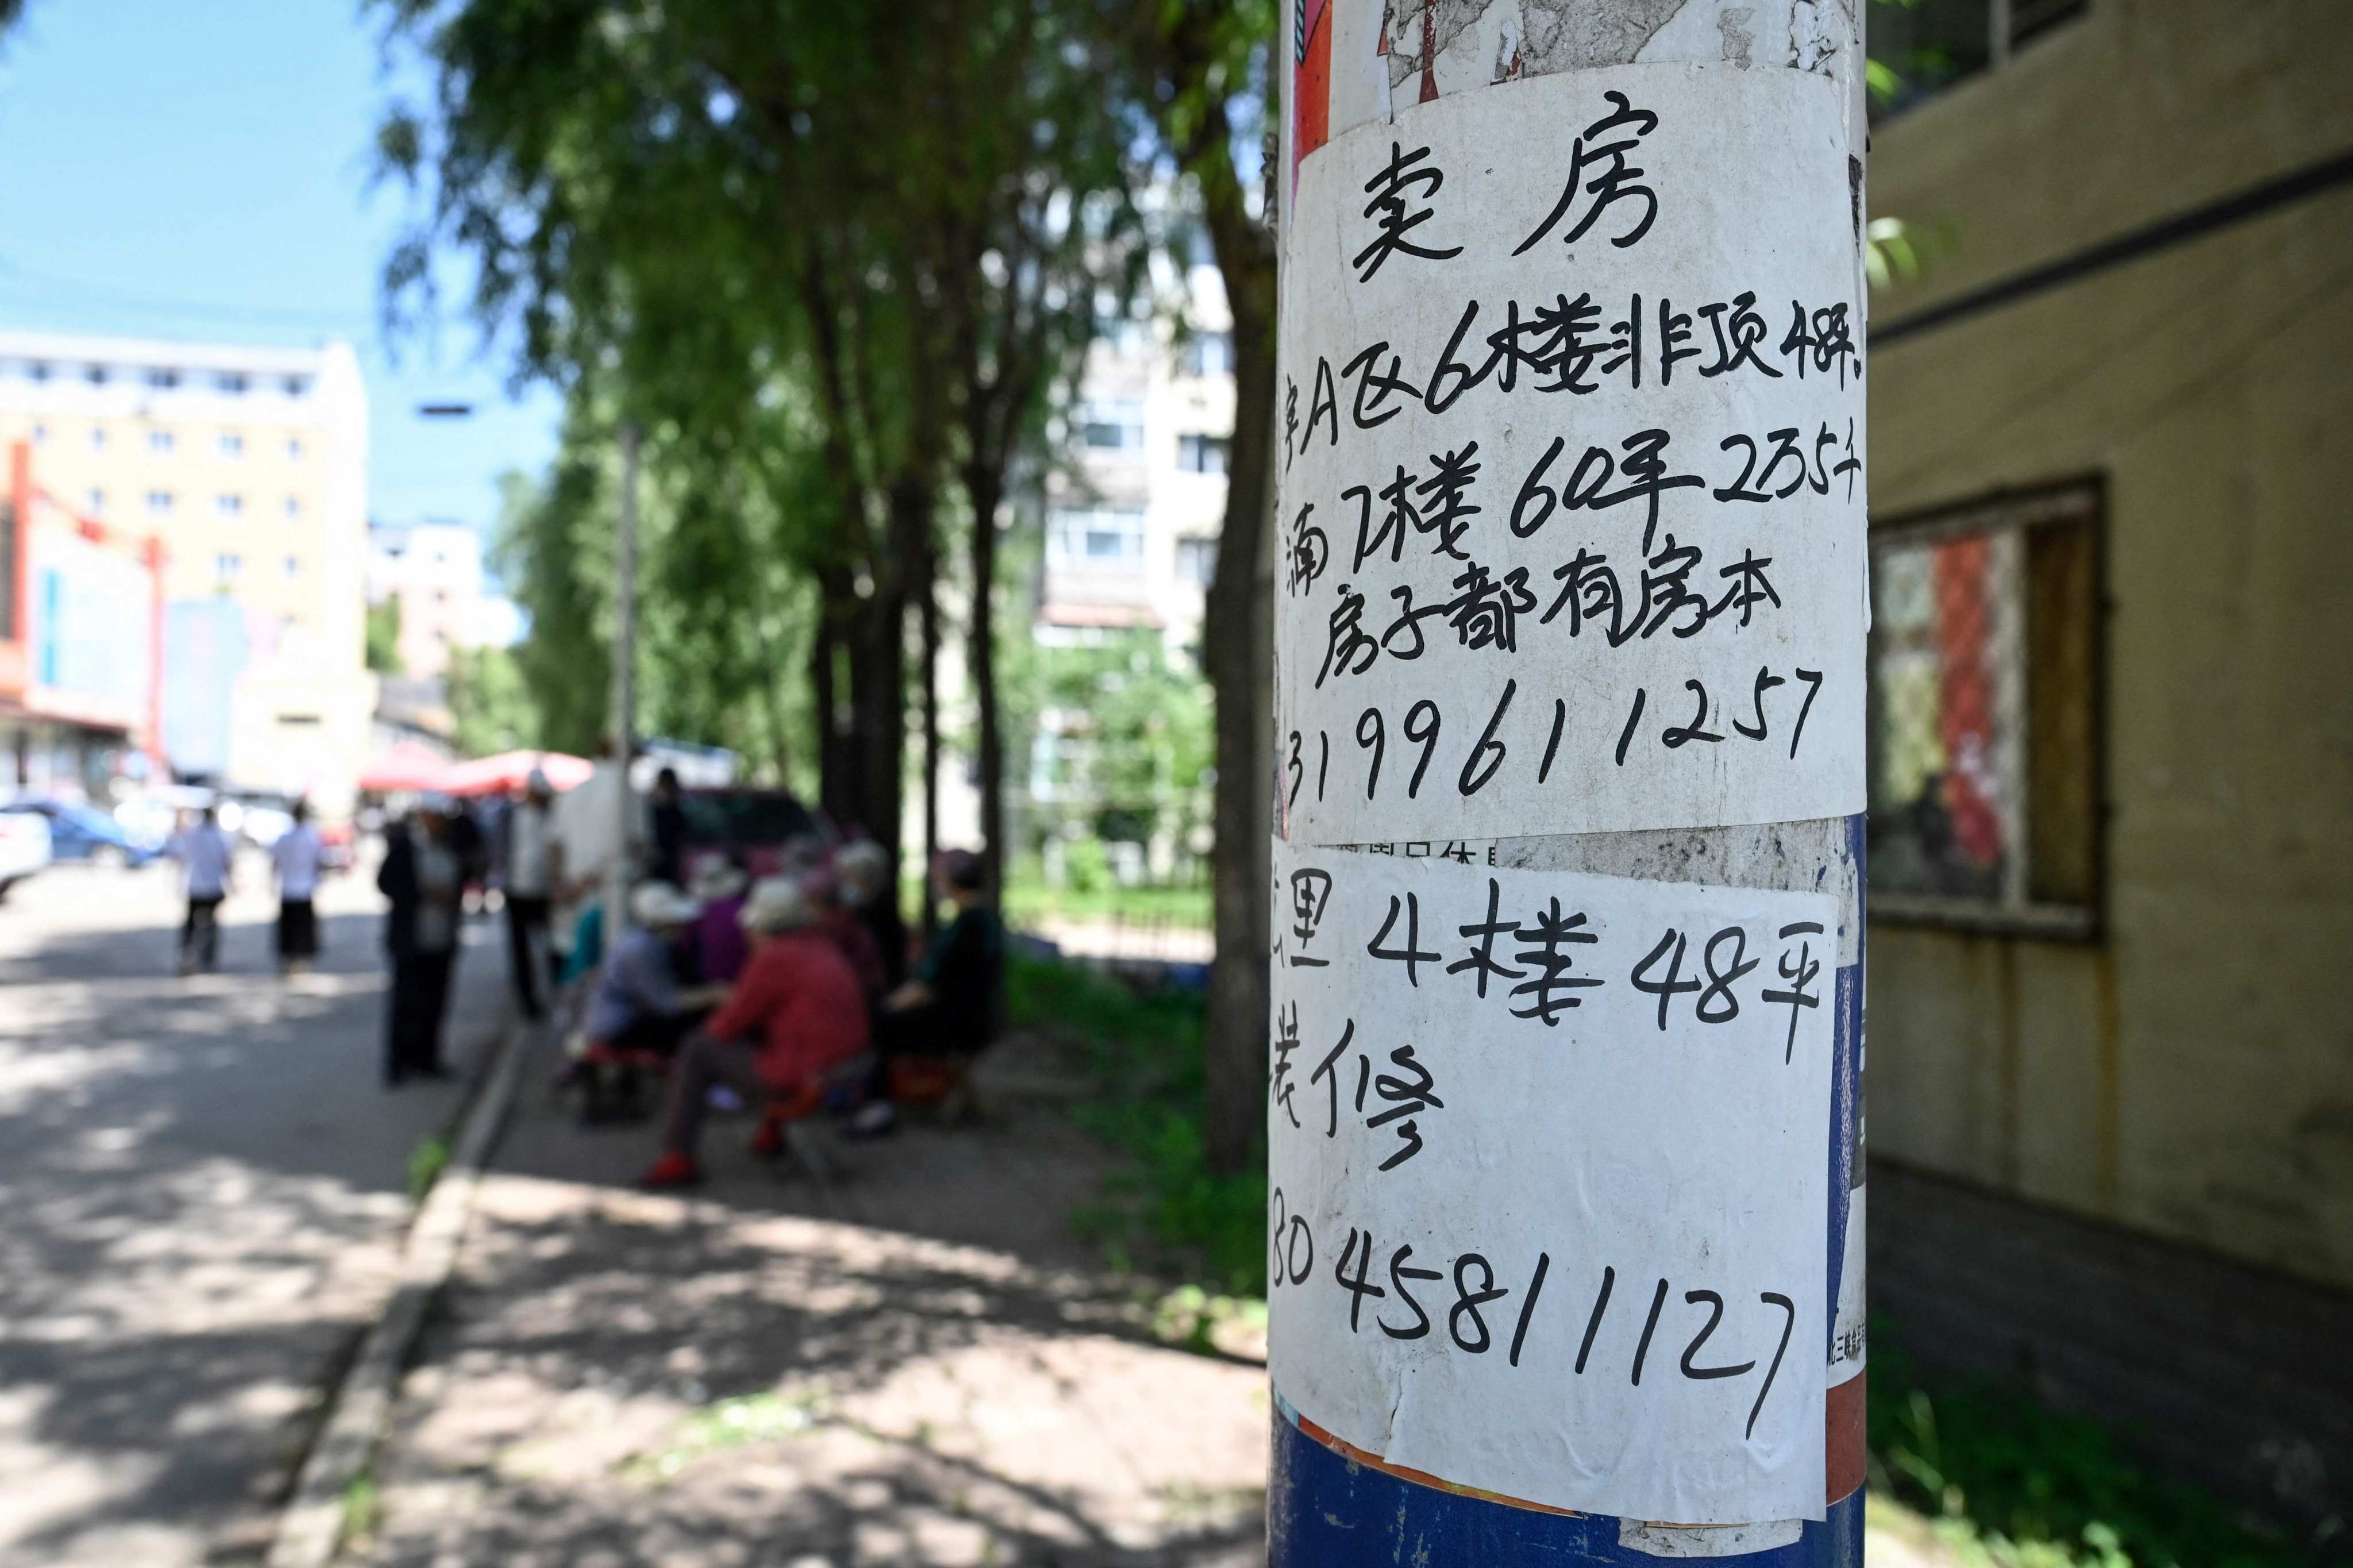 An advertisement for an apartment for sale is posted on a telegraph pole in a residential compound in Hegang city in northeastern China’s Heilongjiang province on July 4.  Retail sales data in July showed that Chinese consumers were still spending in sectors such as catering, but they are cutting back on housing-related spending. Photo: AFP